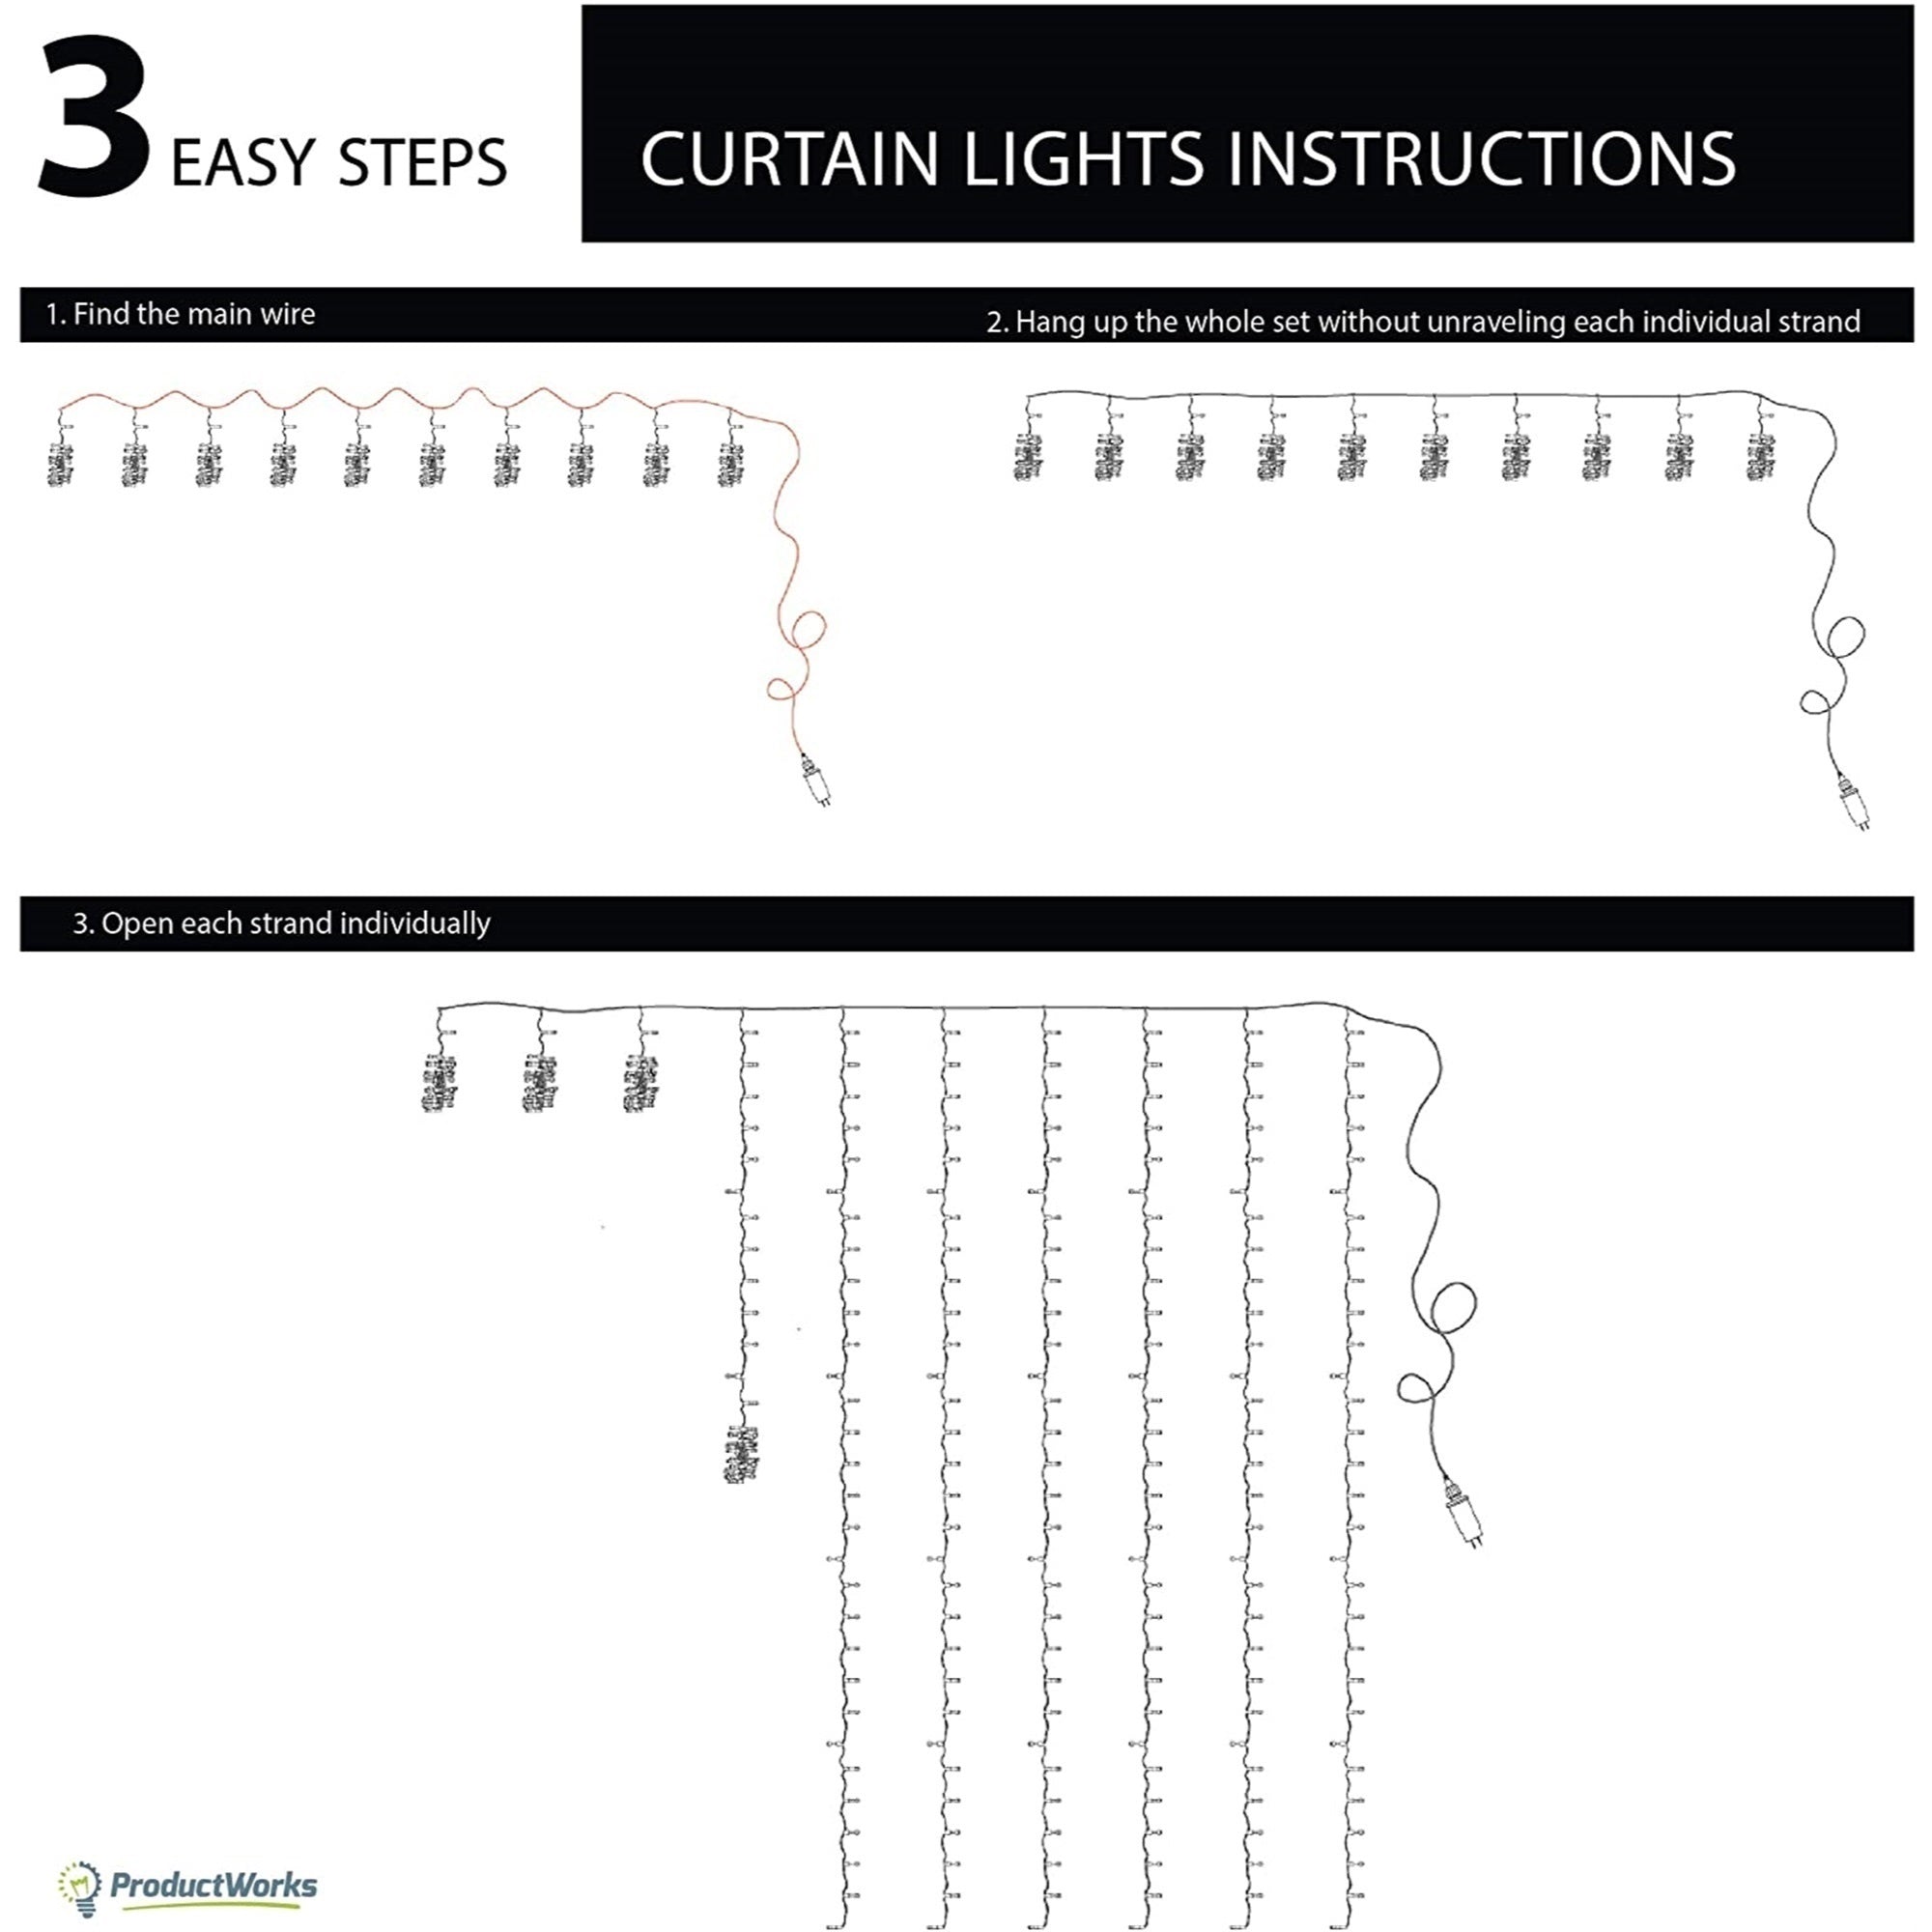 ProductWorks 8-Function String Light Curtain, 600 Bright White Micro Bulbs, 20'